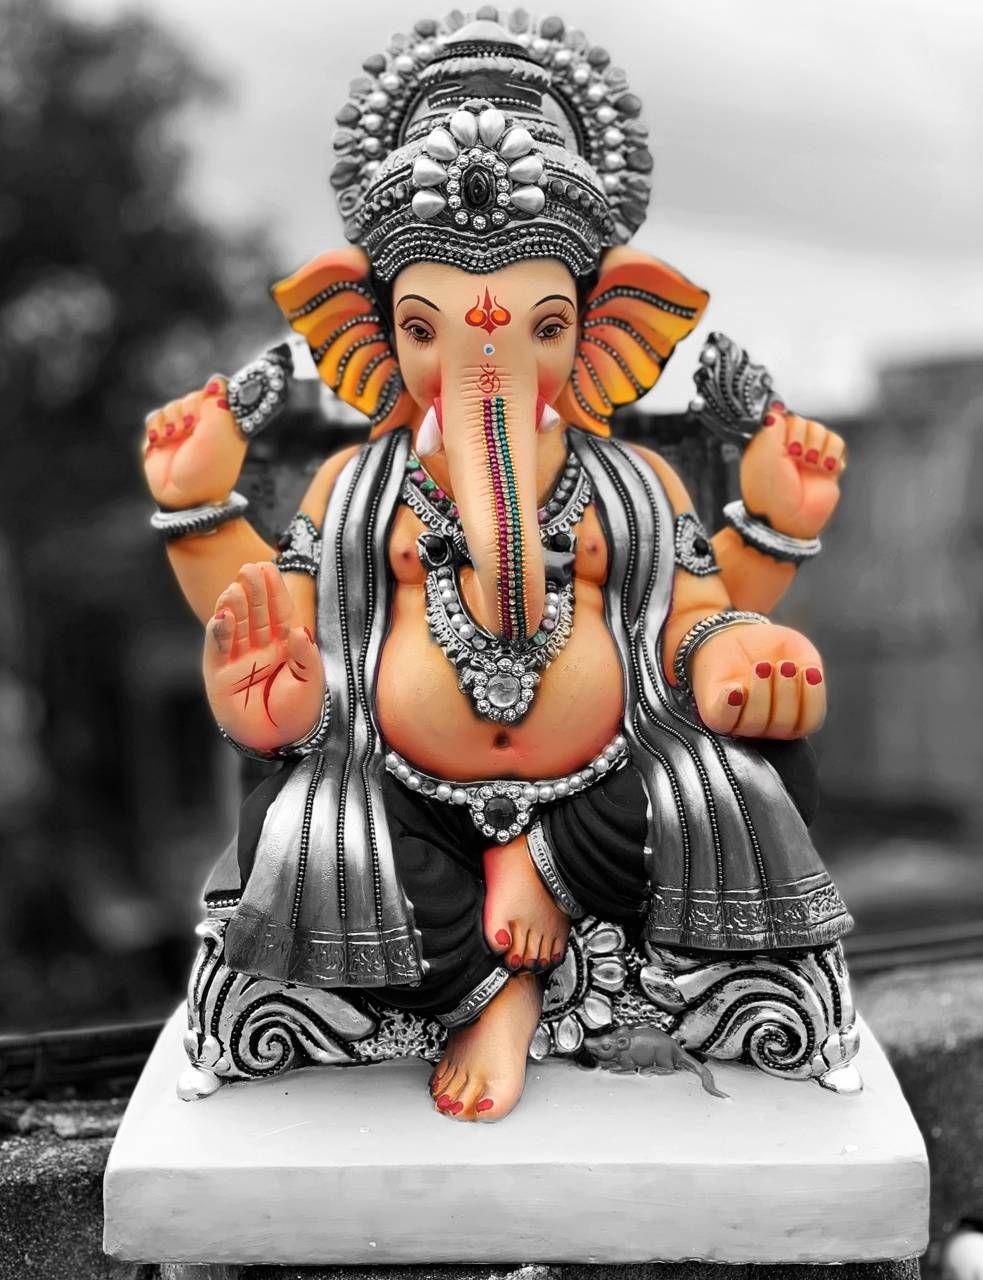 HD Happy Ganesh Chaturthi Images, Photos, Wallpapers, Pics 3D - Wordzz